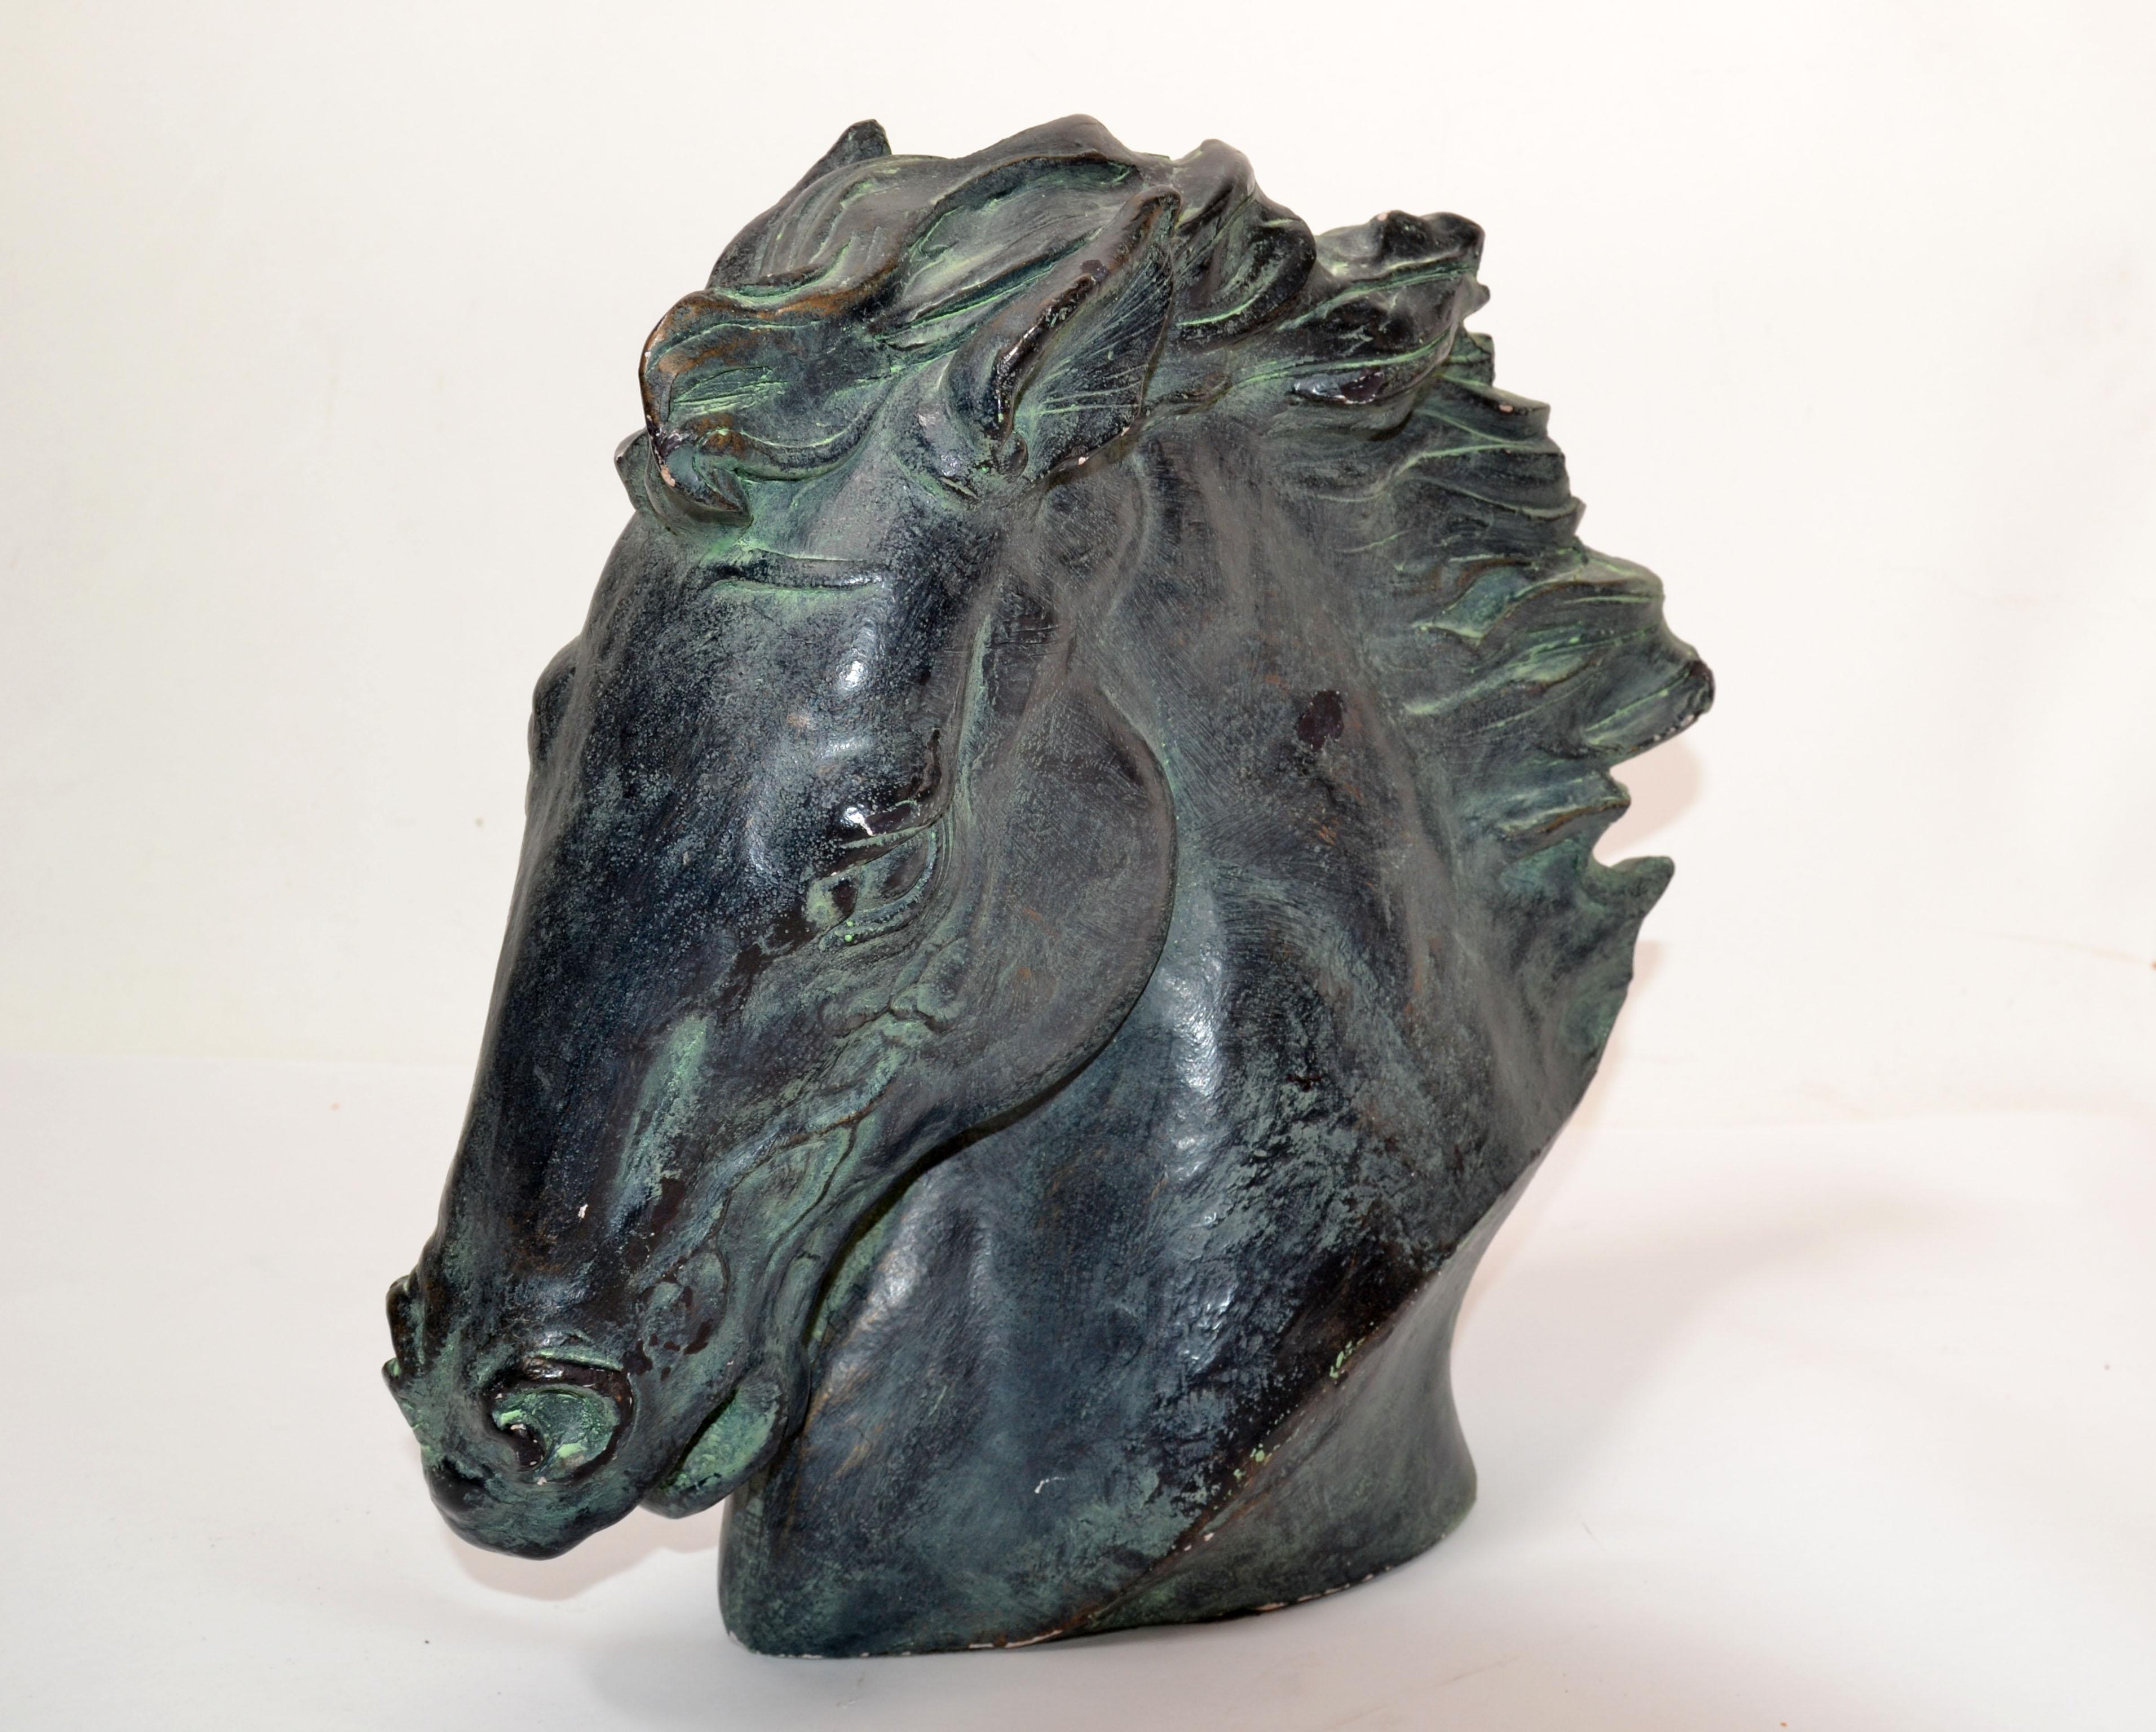 We offer this vintage 1978 Austin Prod. Inc signed by Artist James Spratt 'Flaming Mane' horse head in bronze finish, bust or statue.
Detailed crafted plaster head with original dark green and bronze Finish.
Marked Austin Prod. INC Trademark,